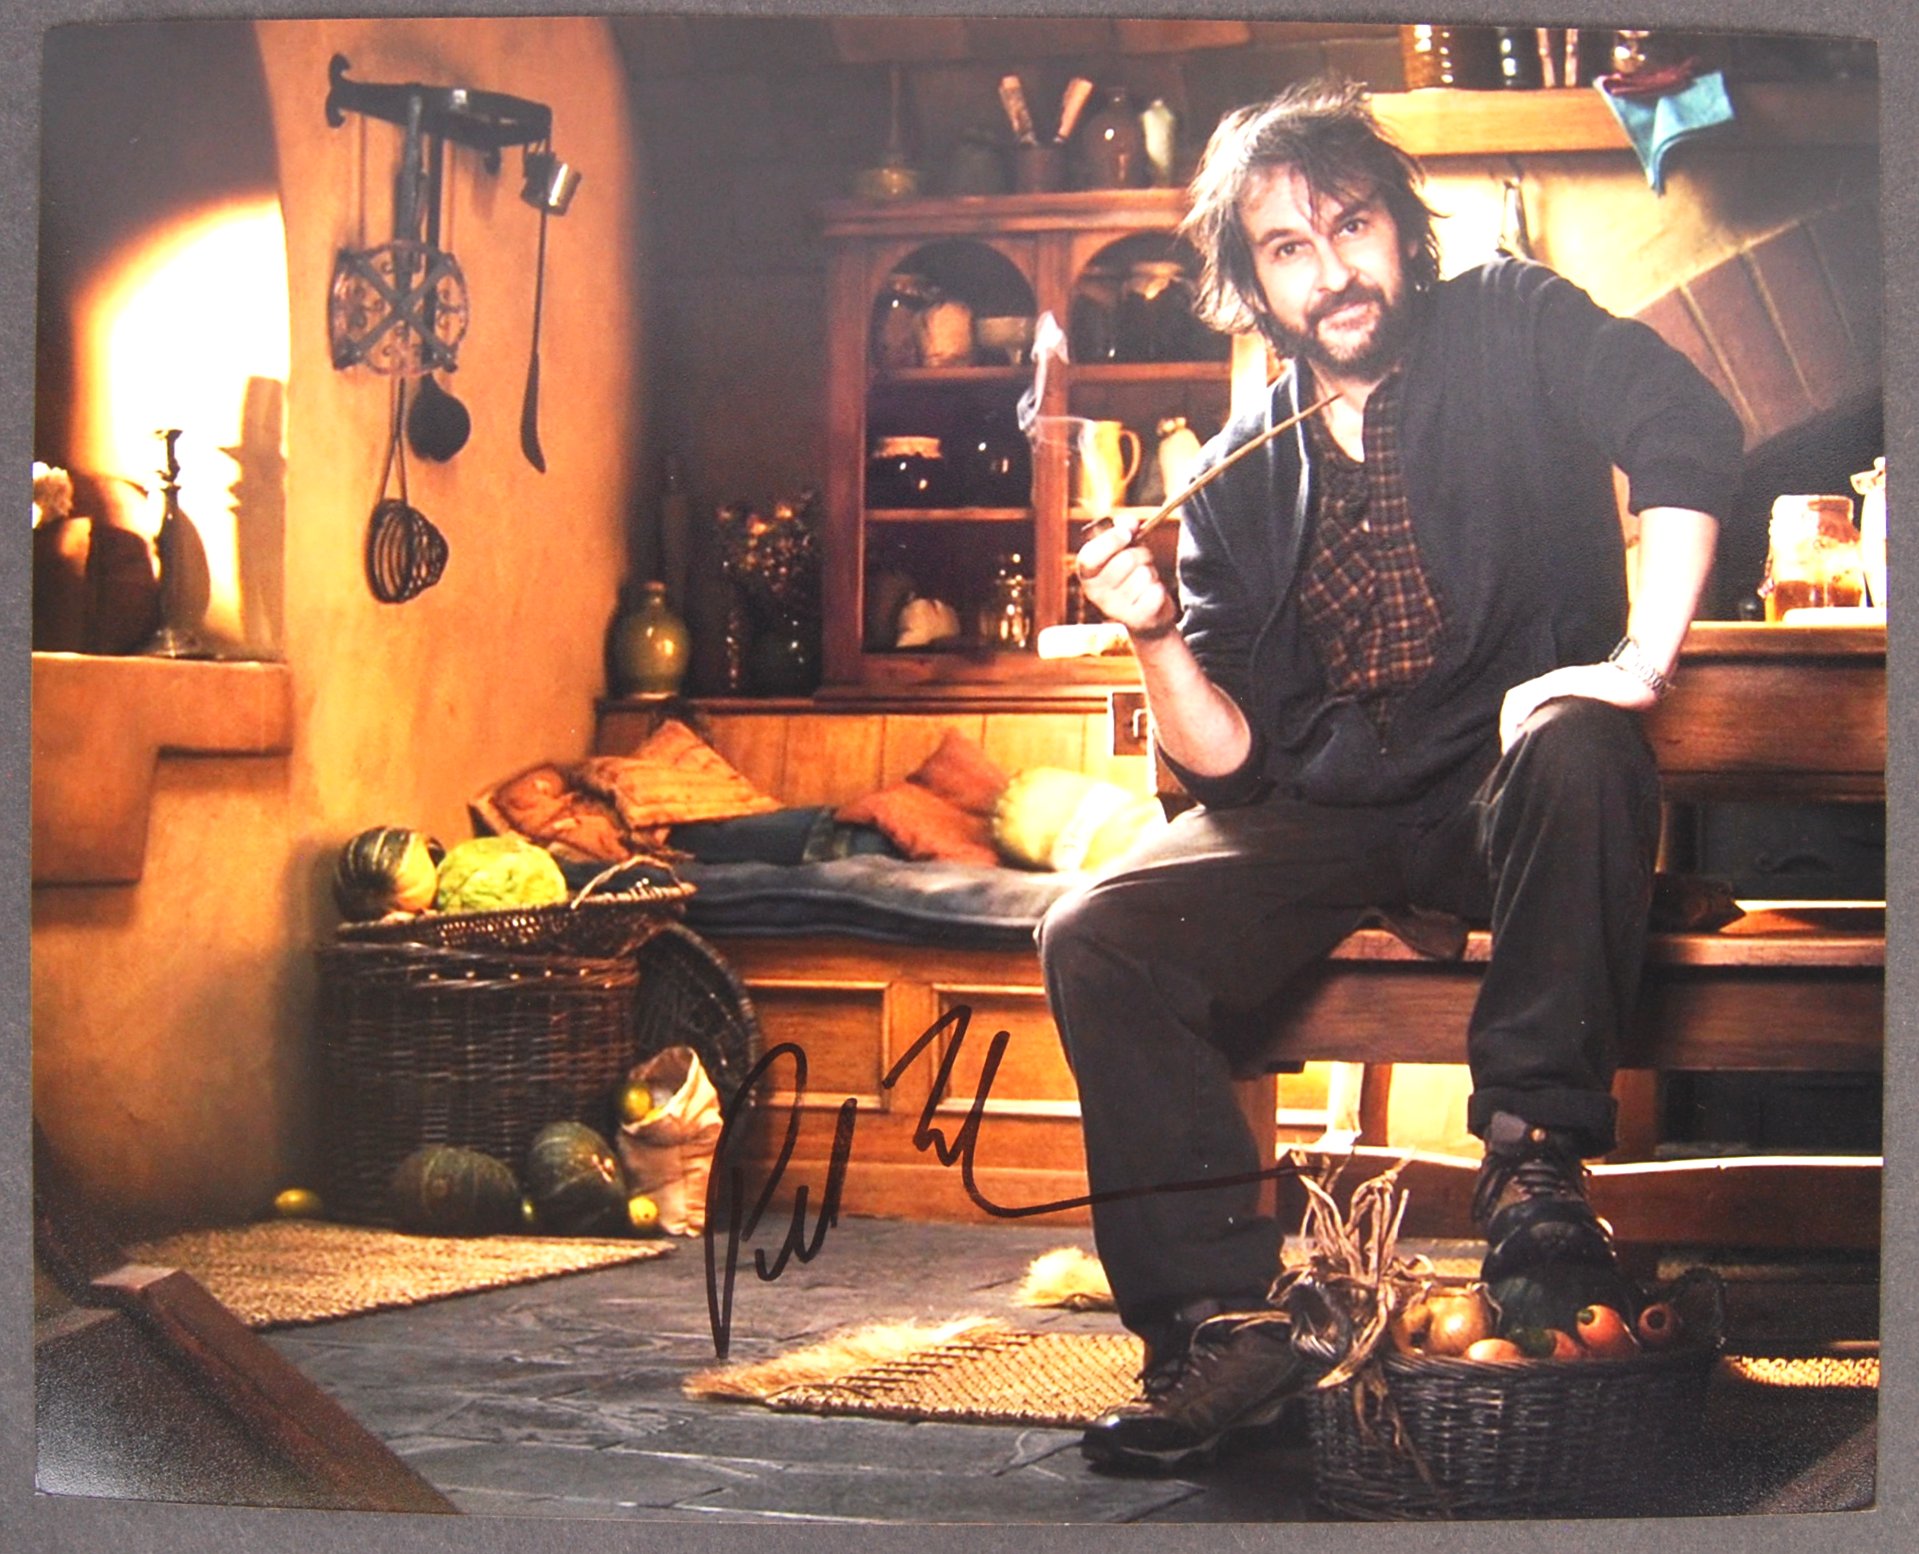 PETER JACKSON - LORD OF THE RINGS - SIGNED PHOTO